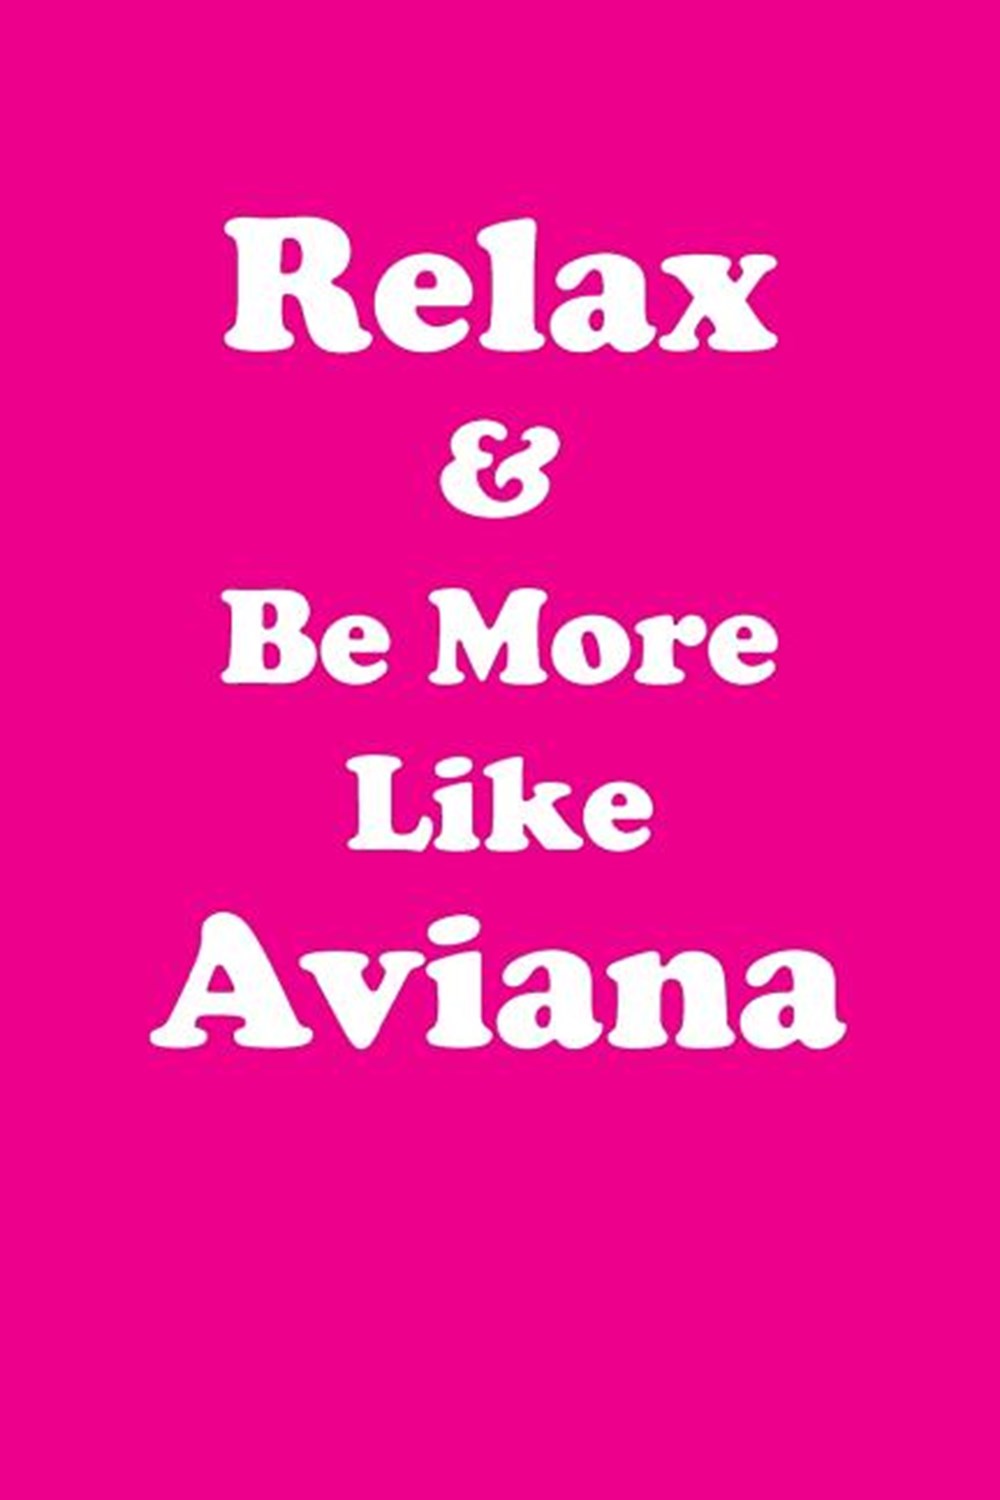 Relax & Be More Like Aviana Affirmations Workbook Positive Affirmations Workbook Includes Mentoring 